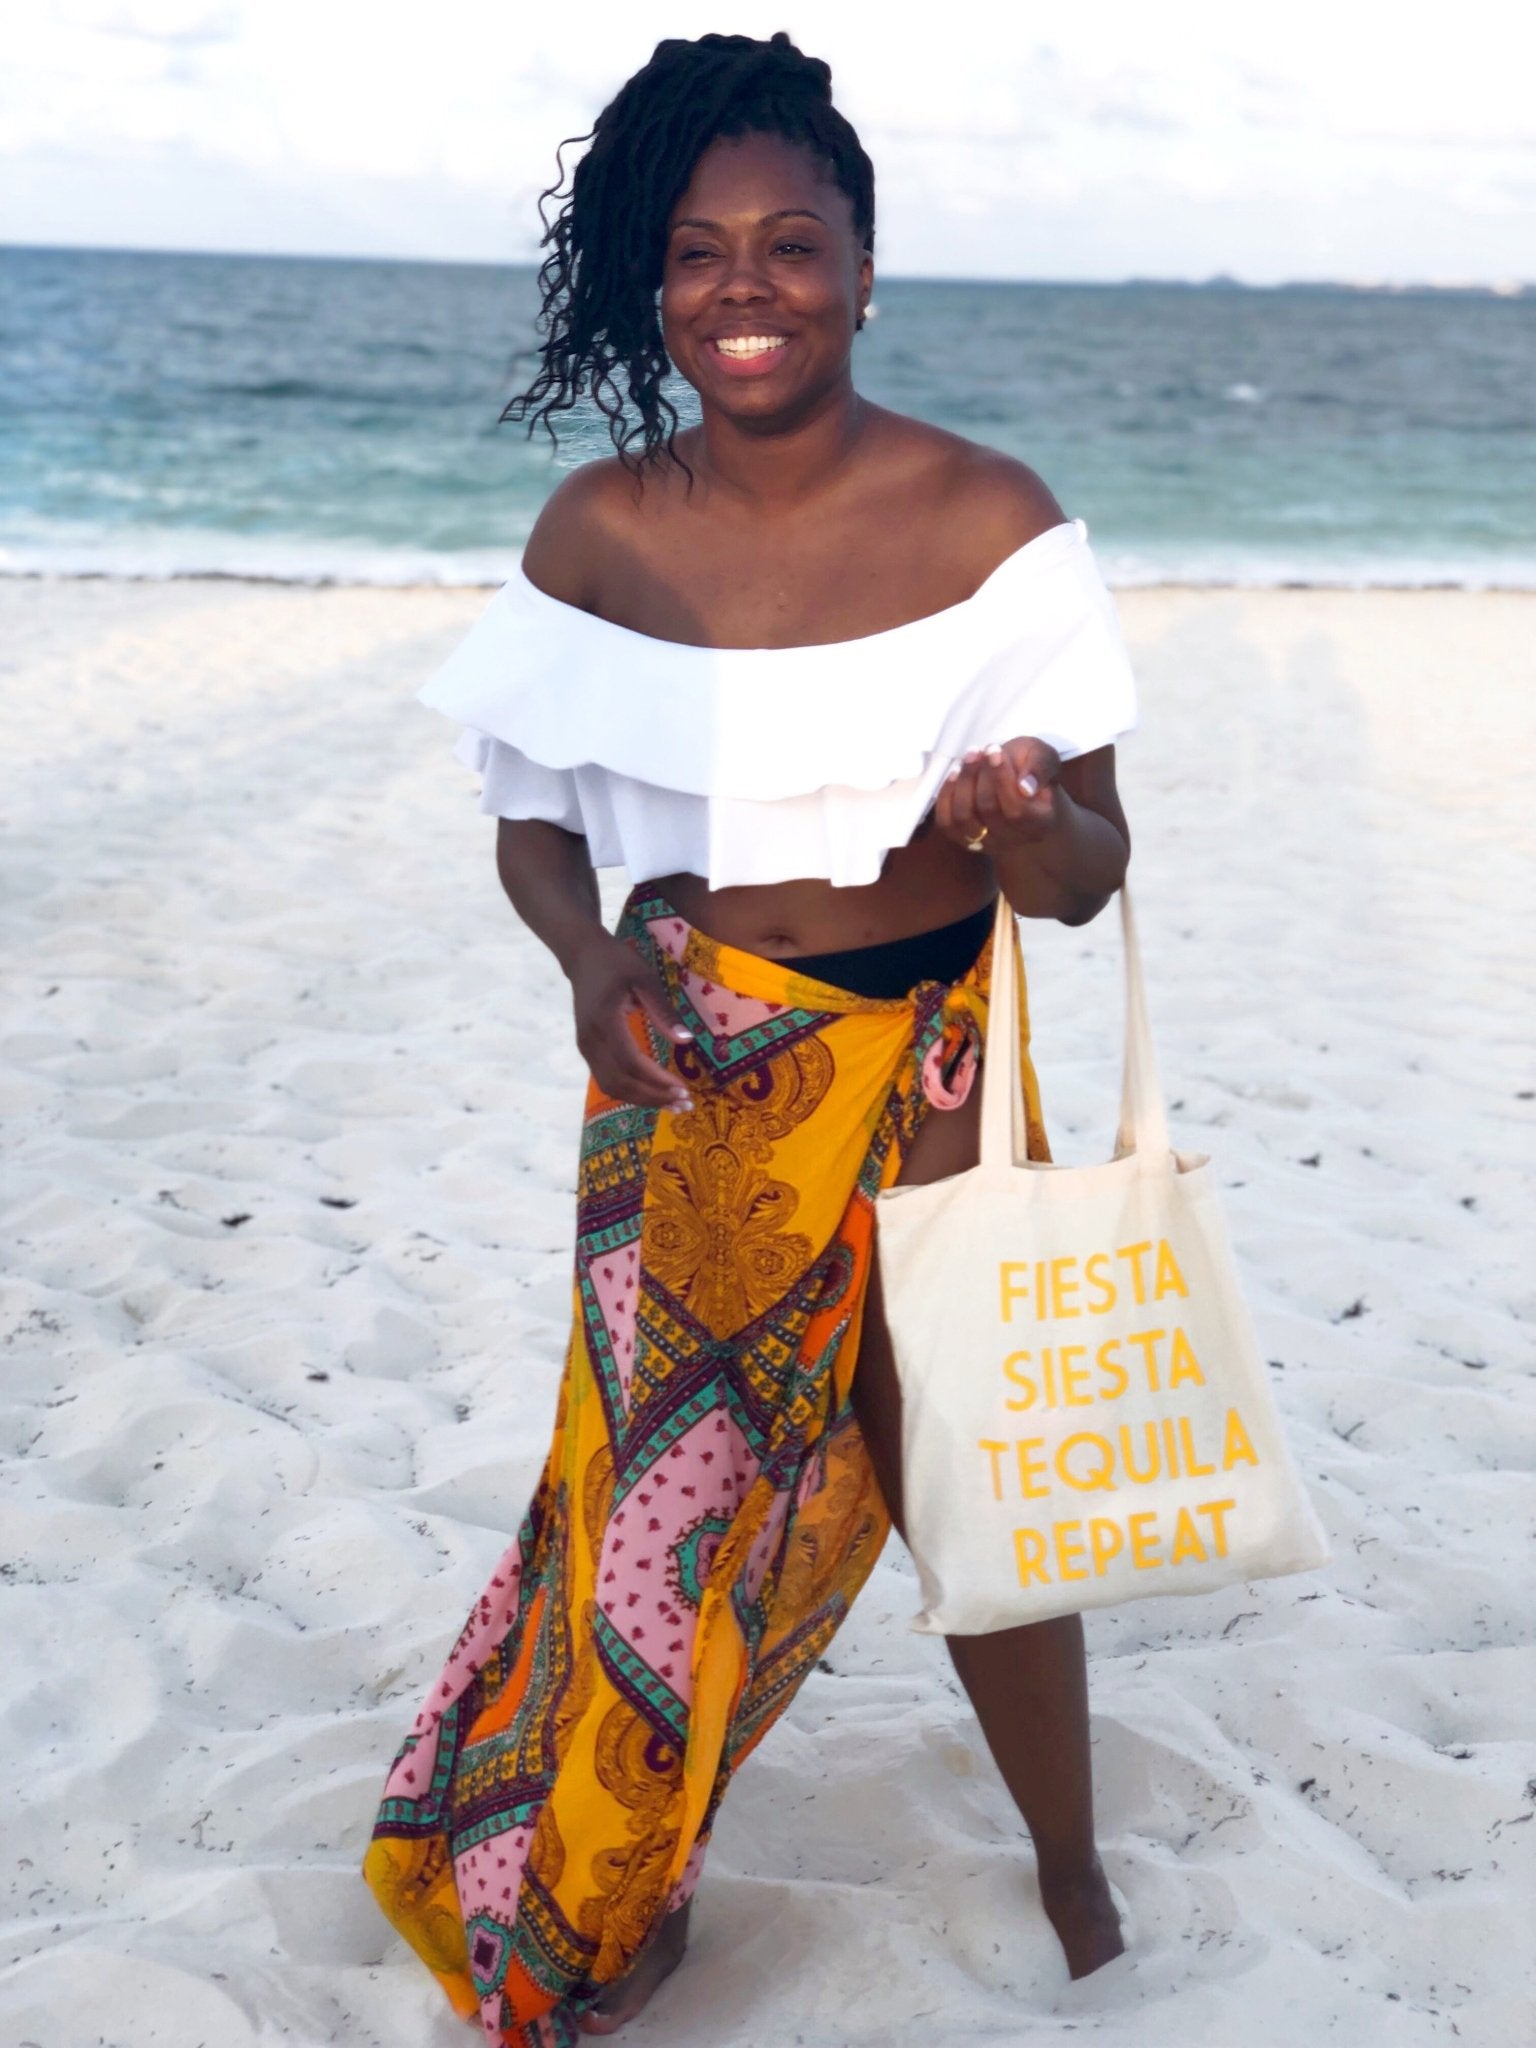 A cotton tote reads "Fiesta Siesta Tequila Repeat" in a light blue font and holds a bouquet of flowers and some magazines.